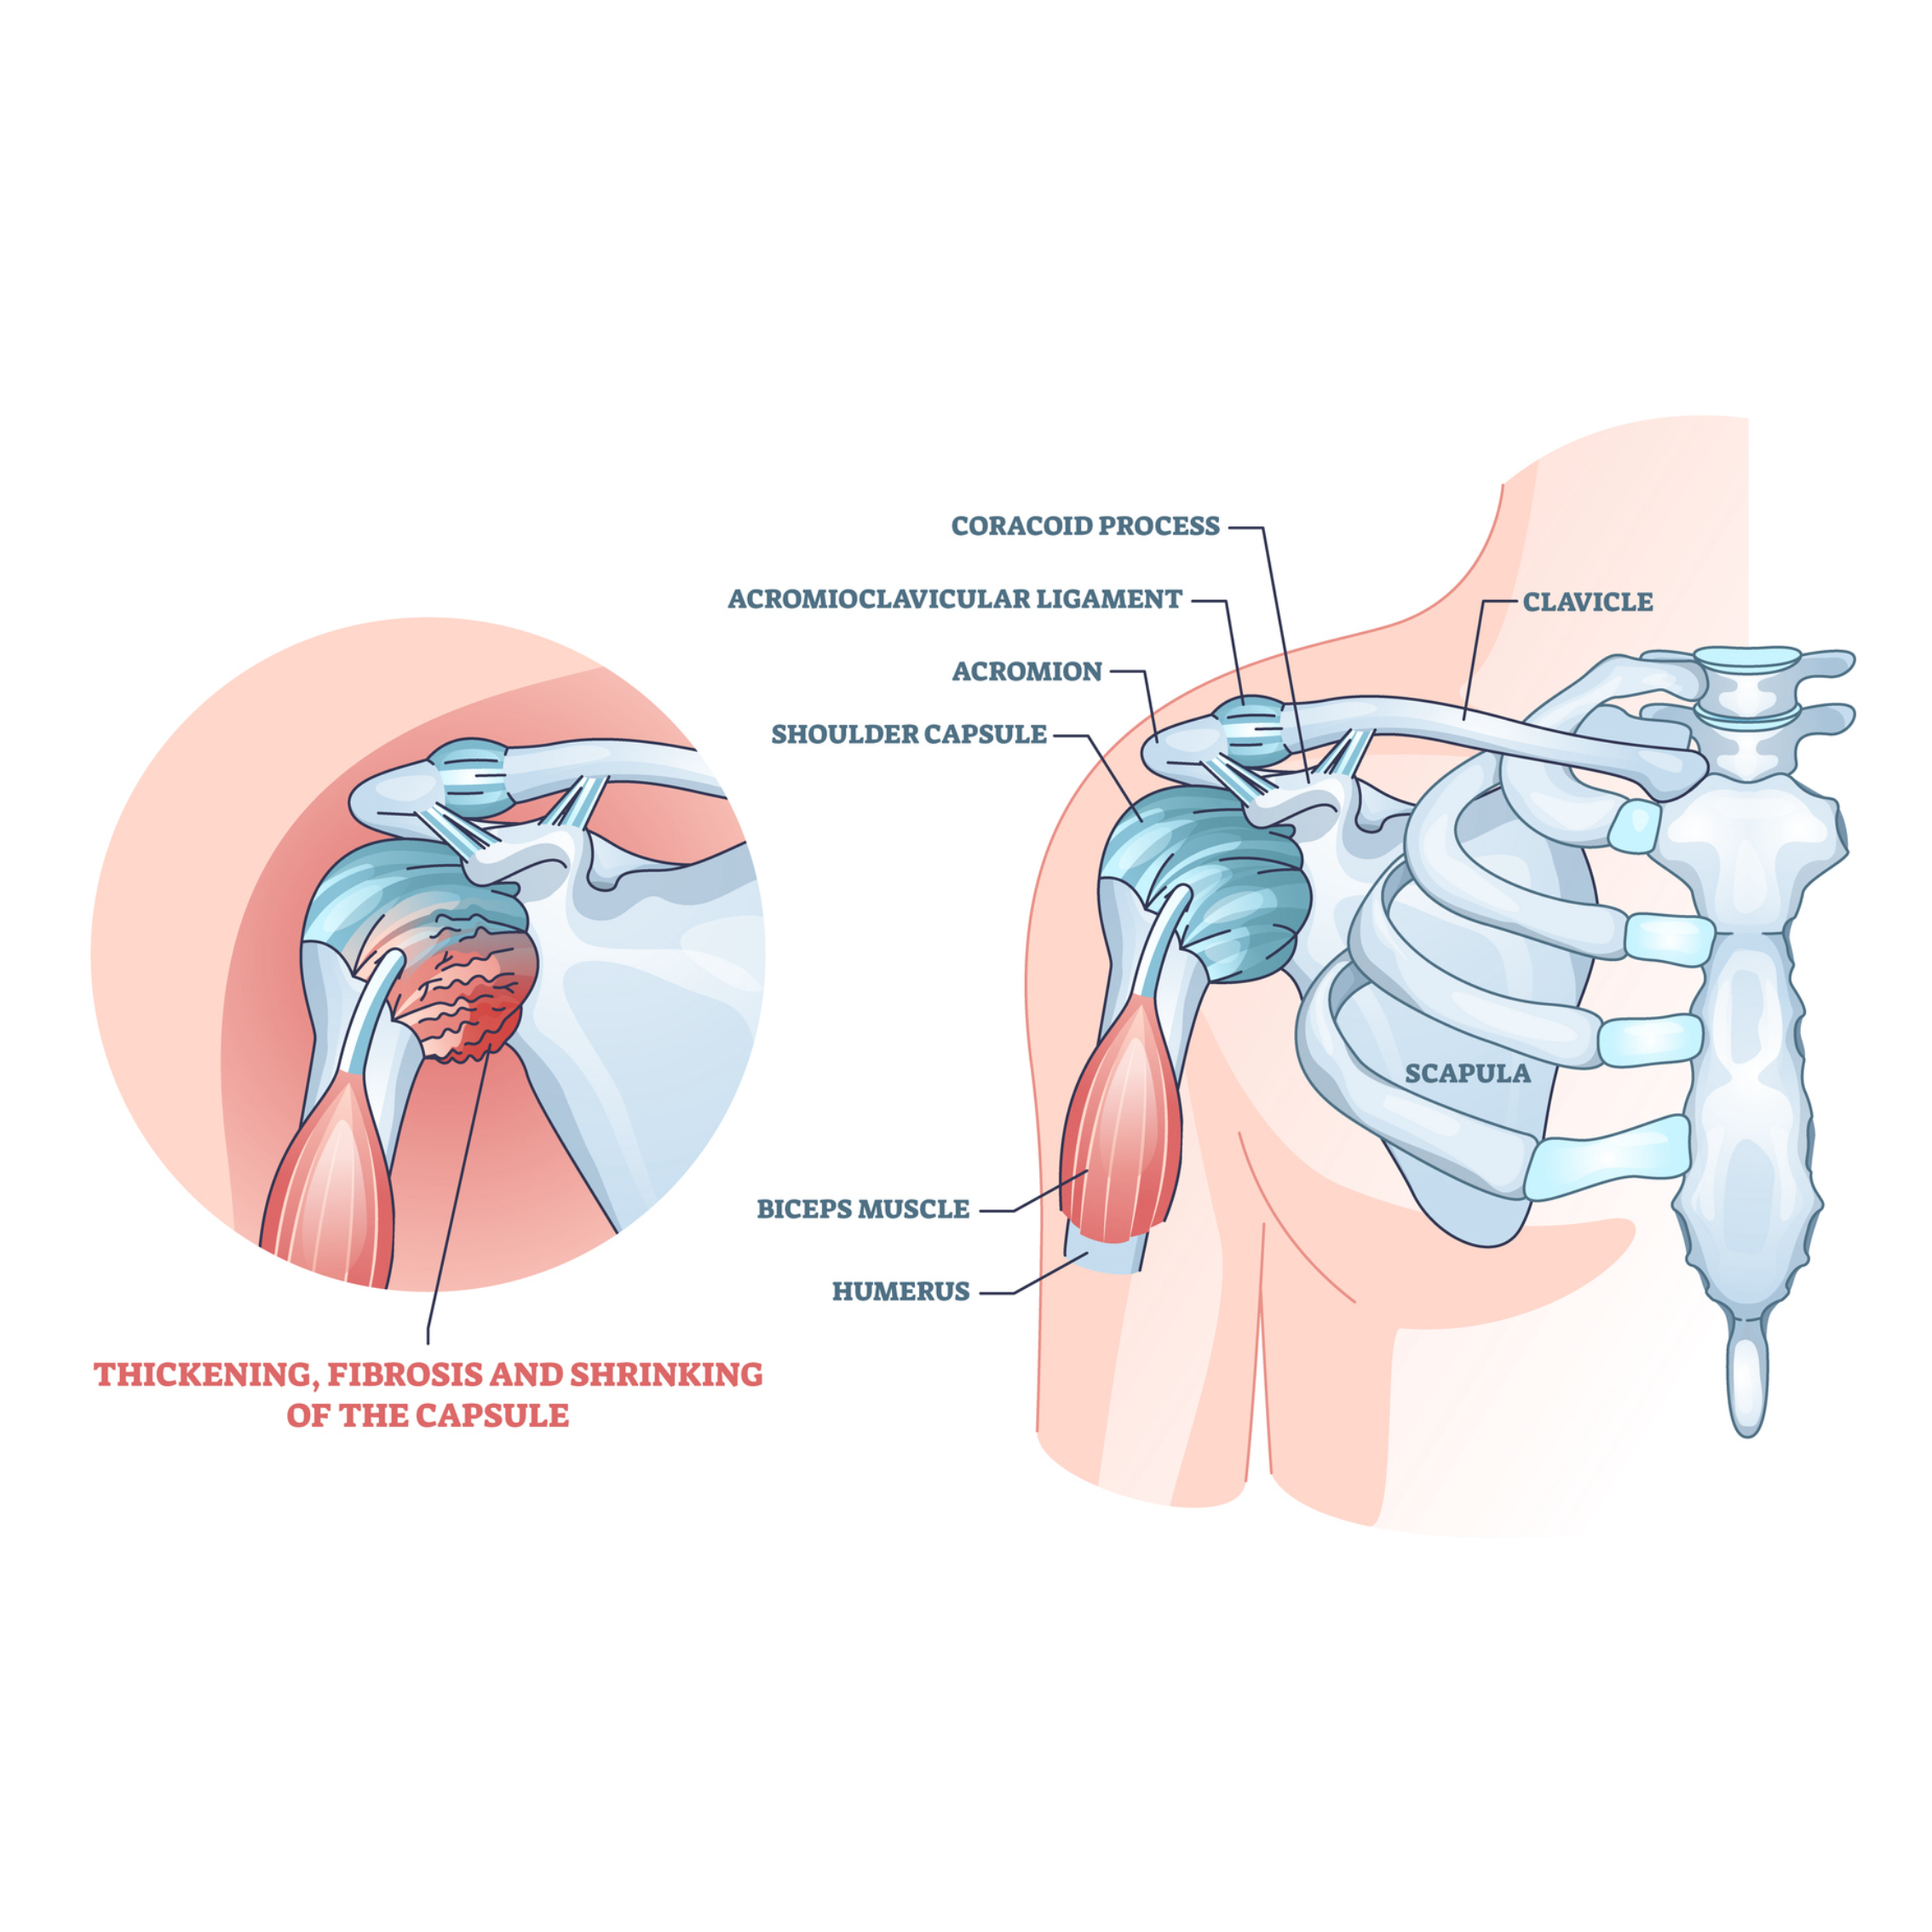 Frozen Shoulder - What is Happening to the Shoulder?, Frozen Shoulder,  Shoulder and more